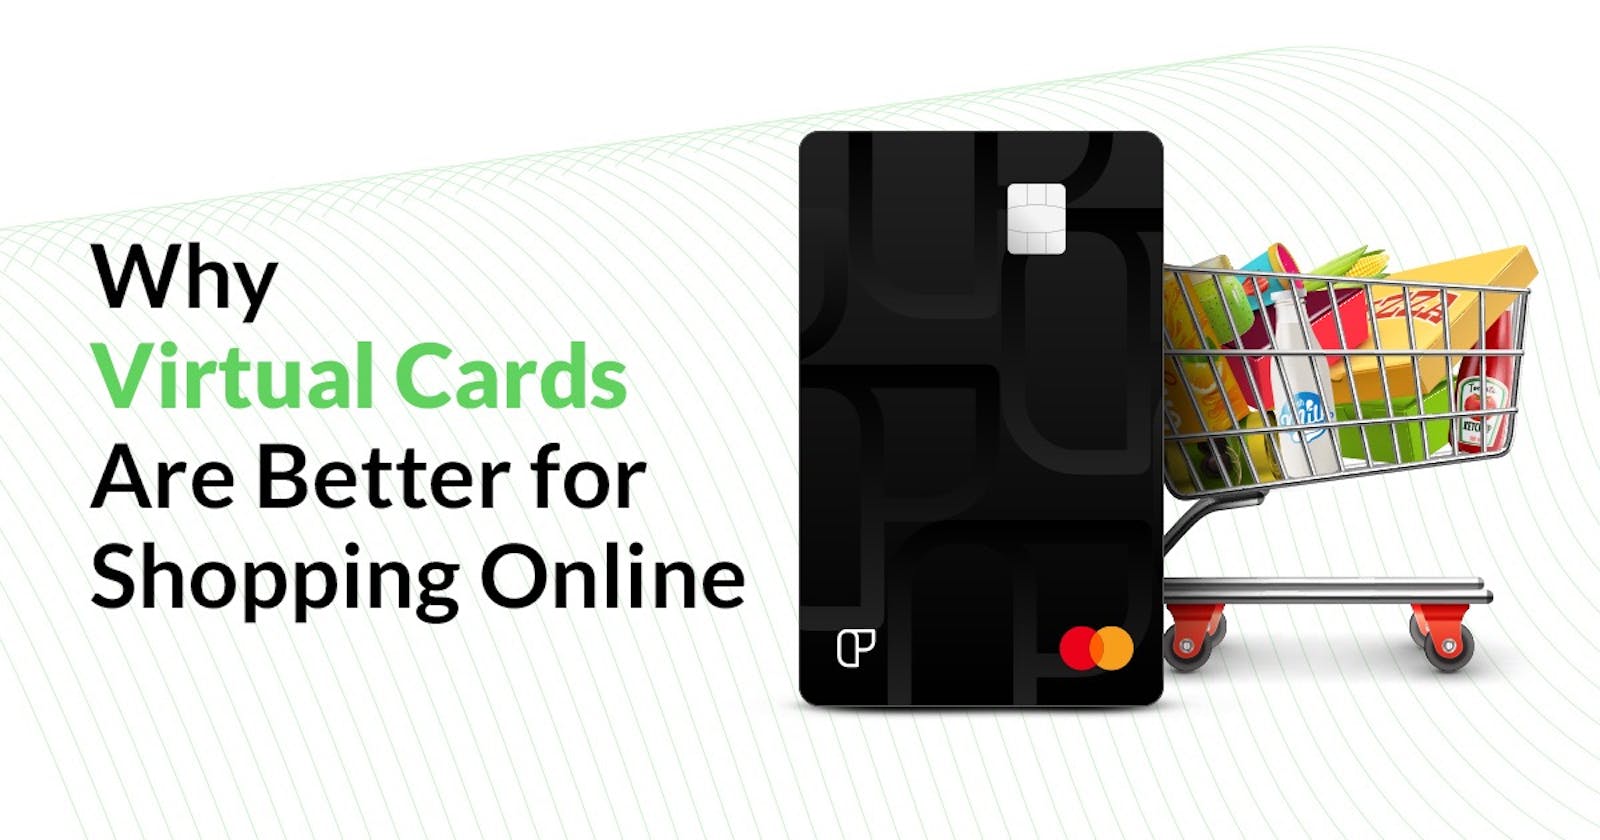 Why Virtual Cards Are Better for Shopping Online